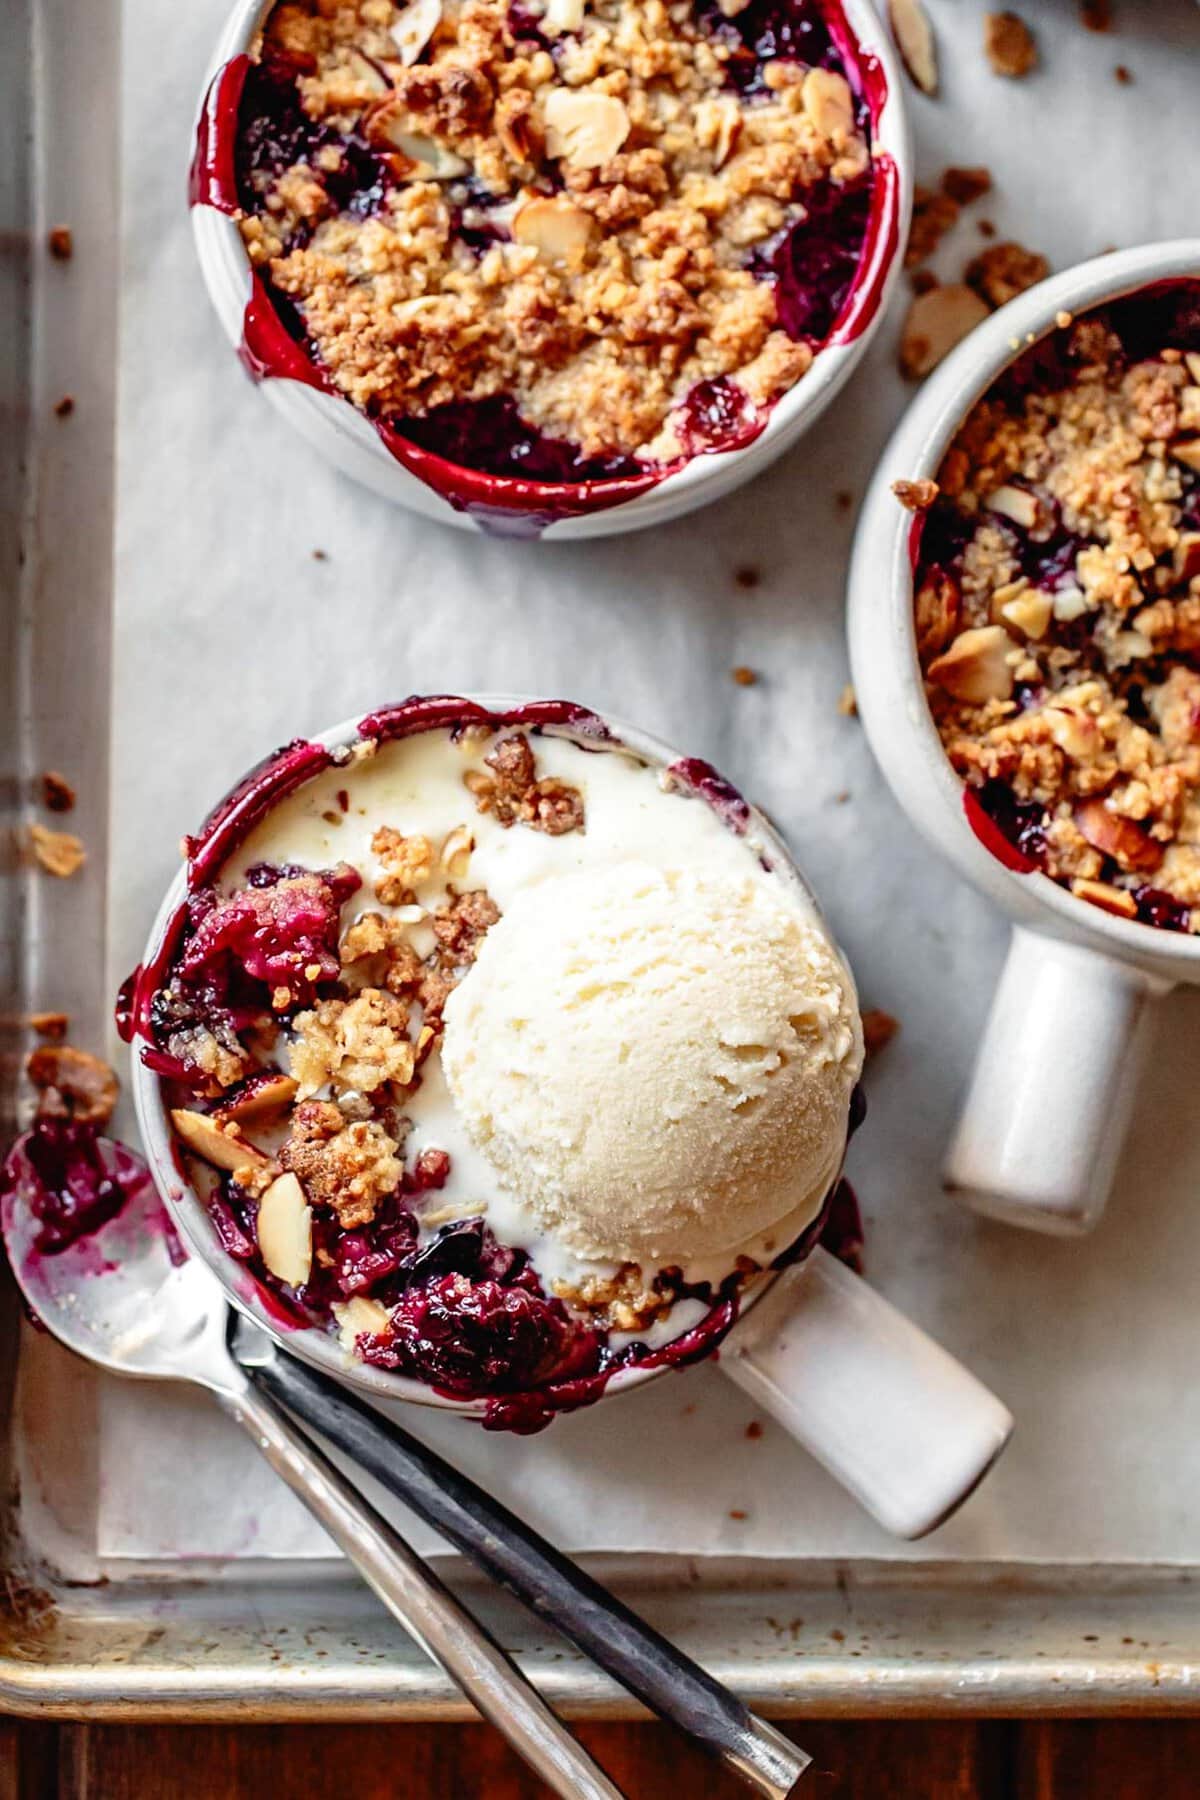 A scoop of ivory cream melts atop red berry crisp